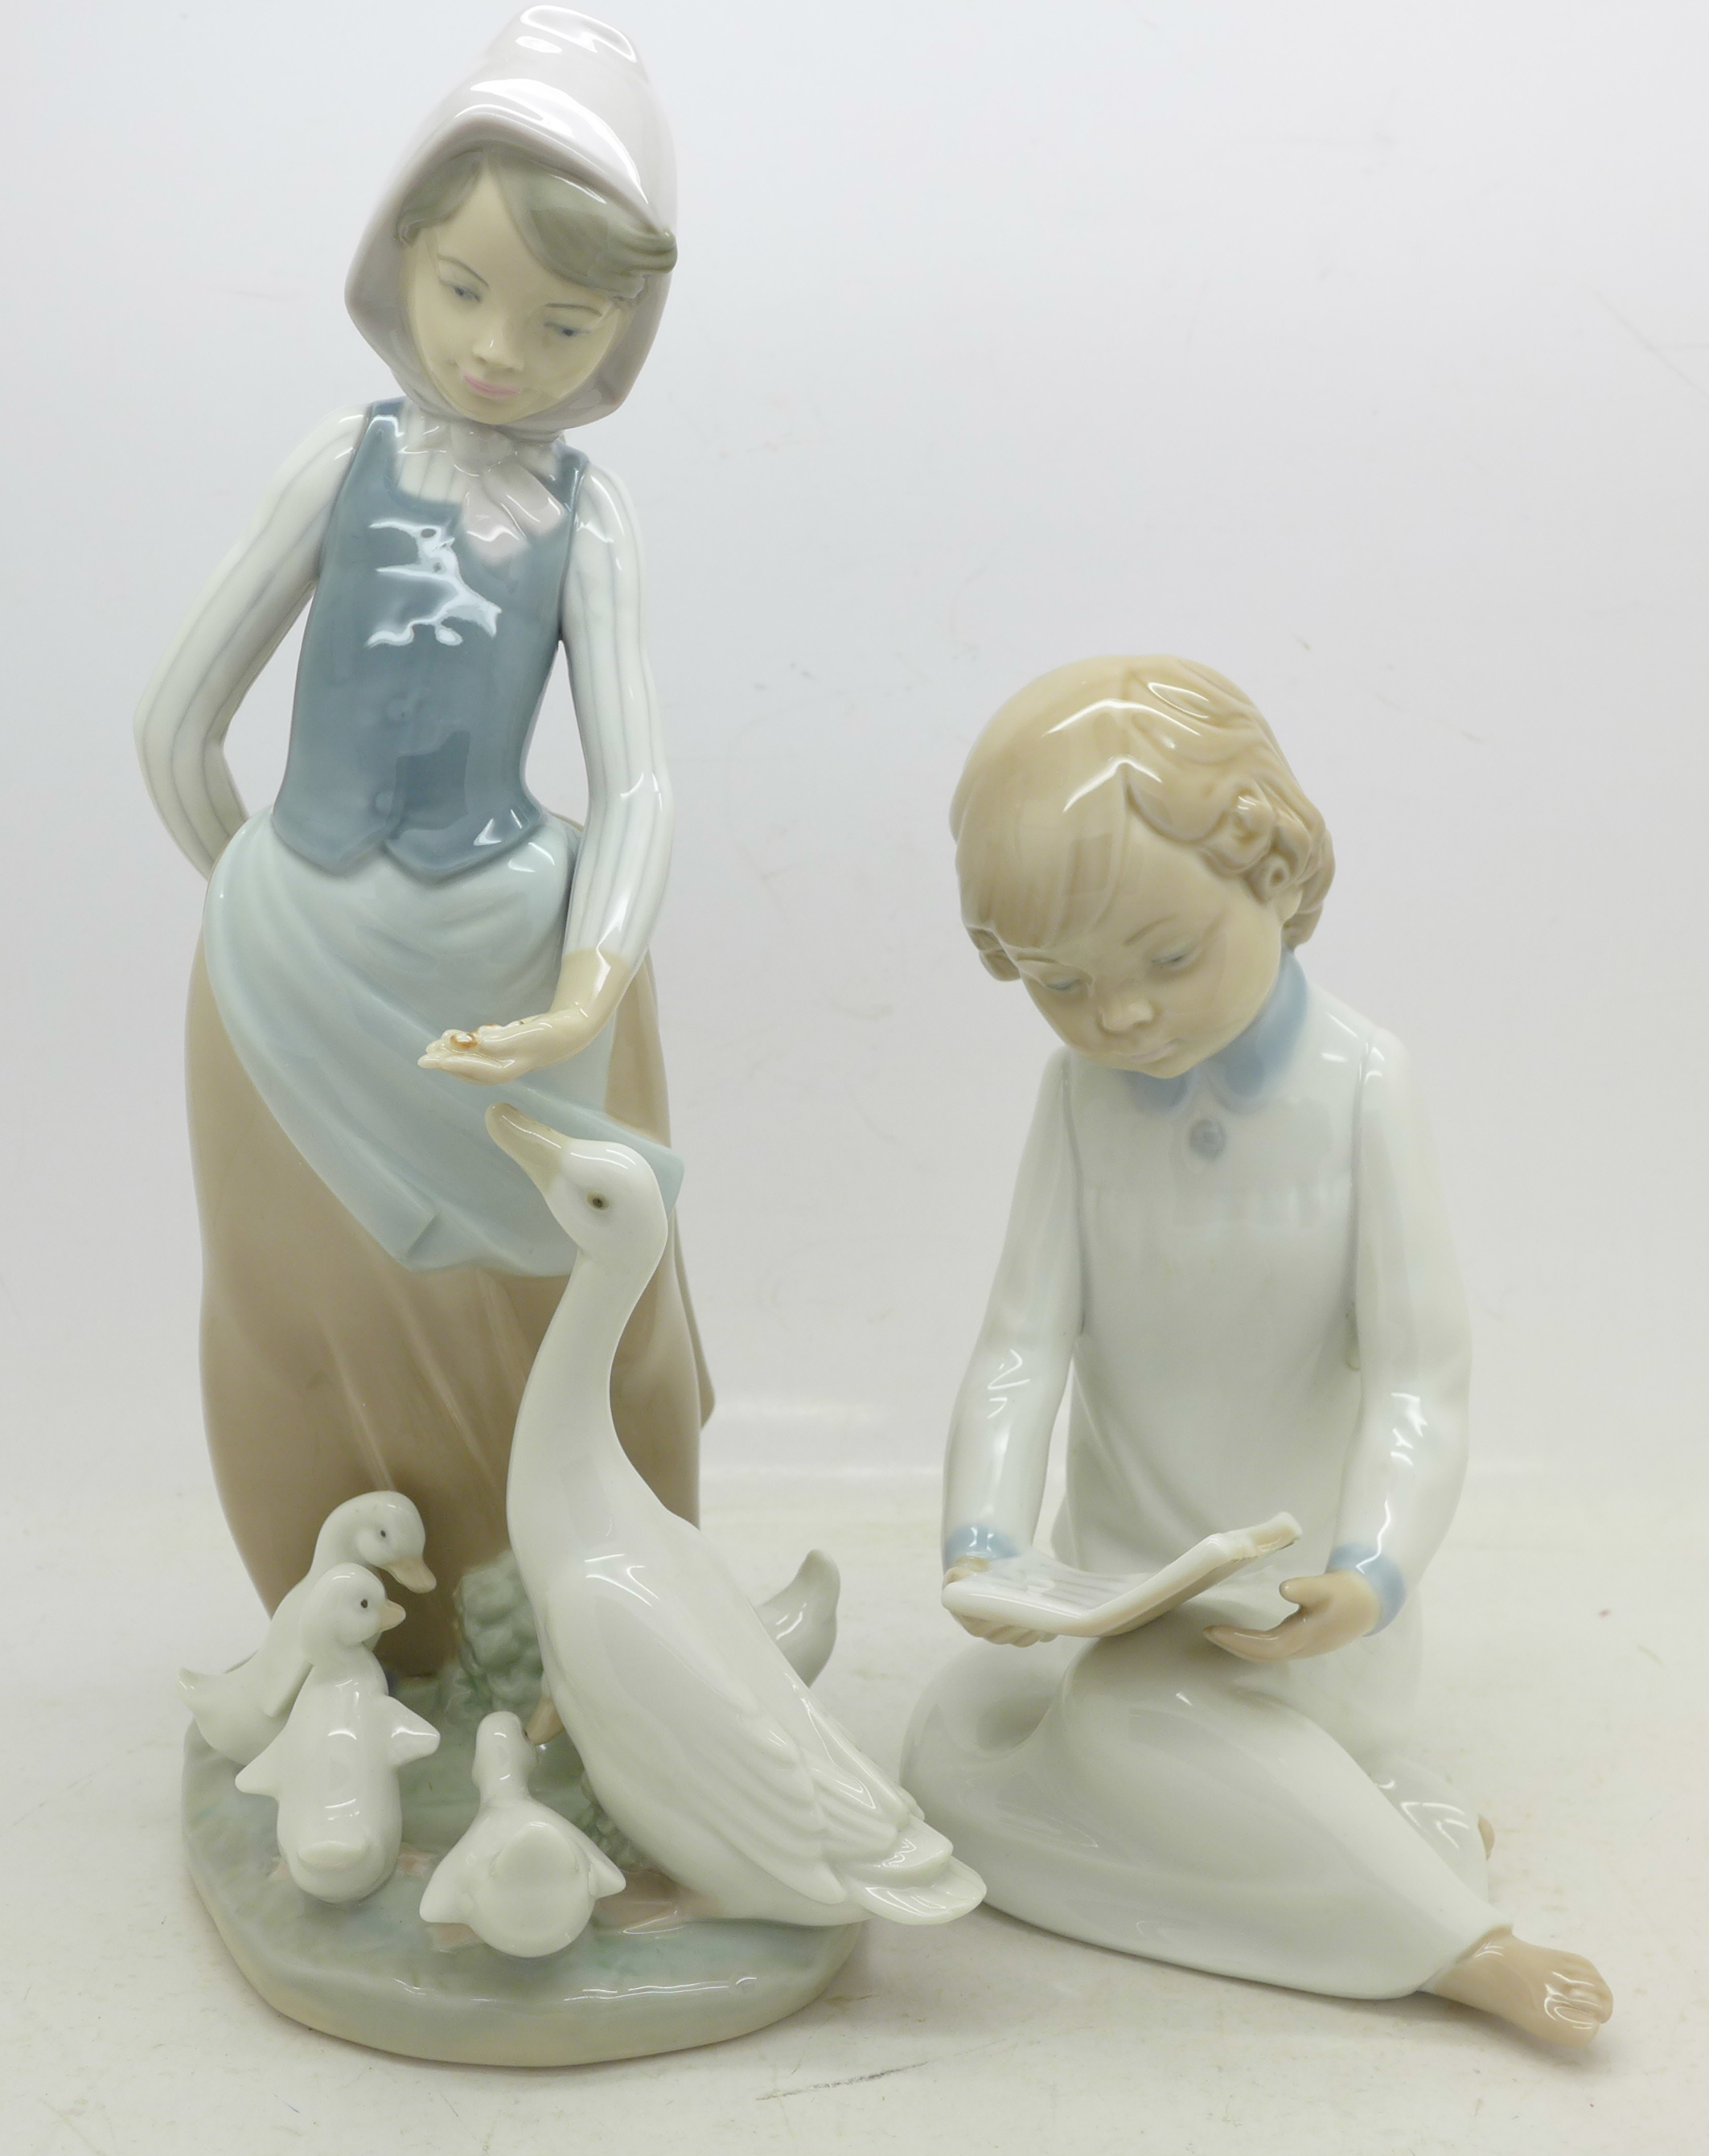 A Lladro figure of a lady with geese and a Nao figure